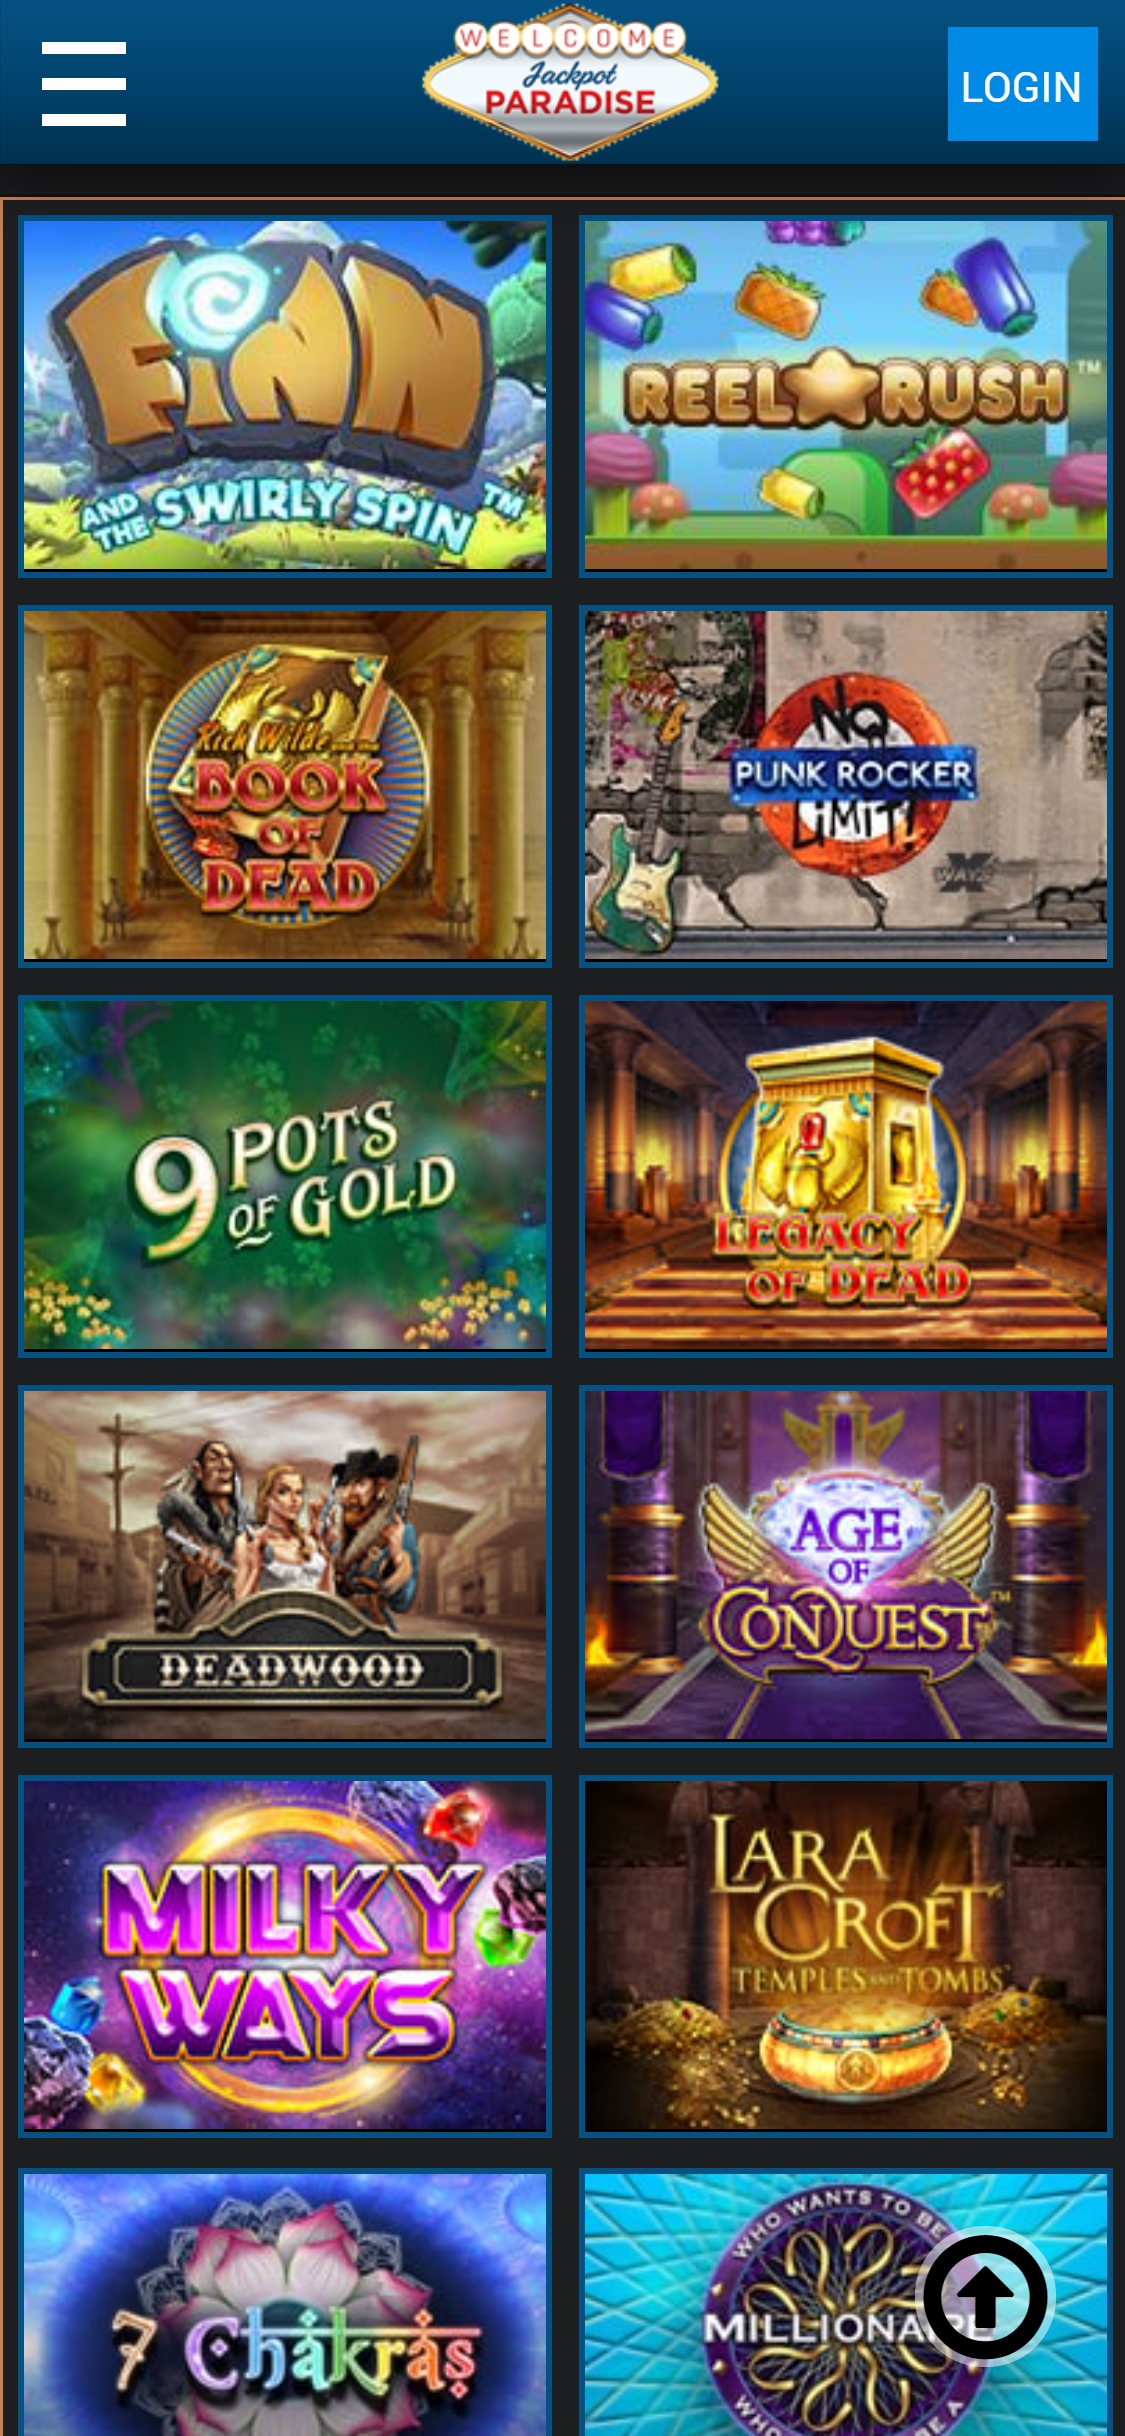 Jackpot Paradise Casino Mobile Games Review